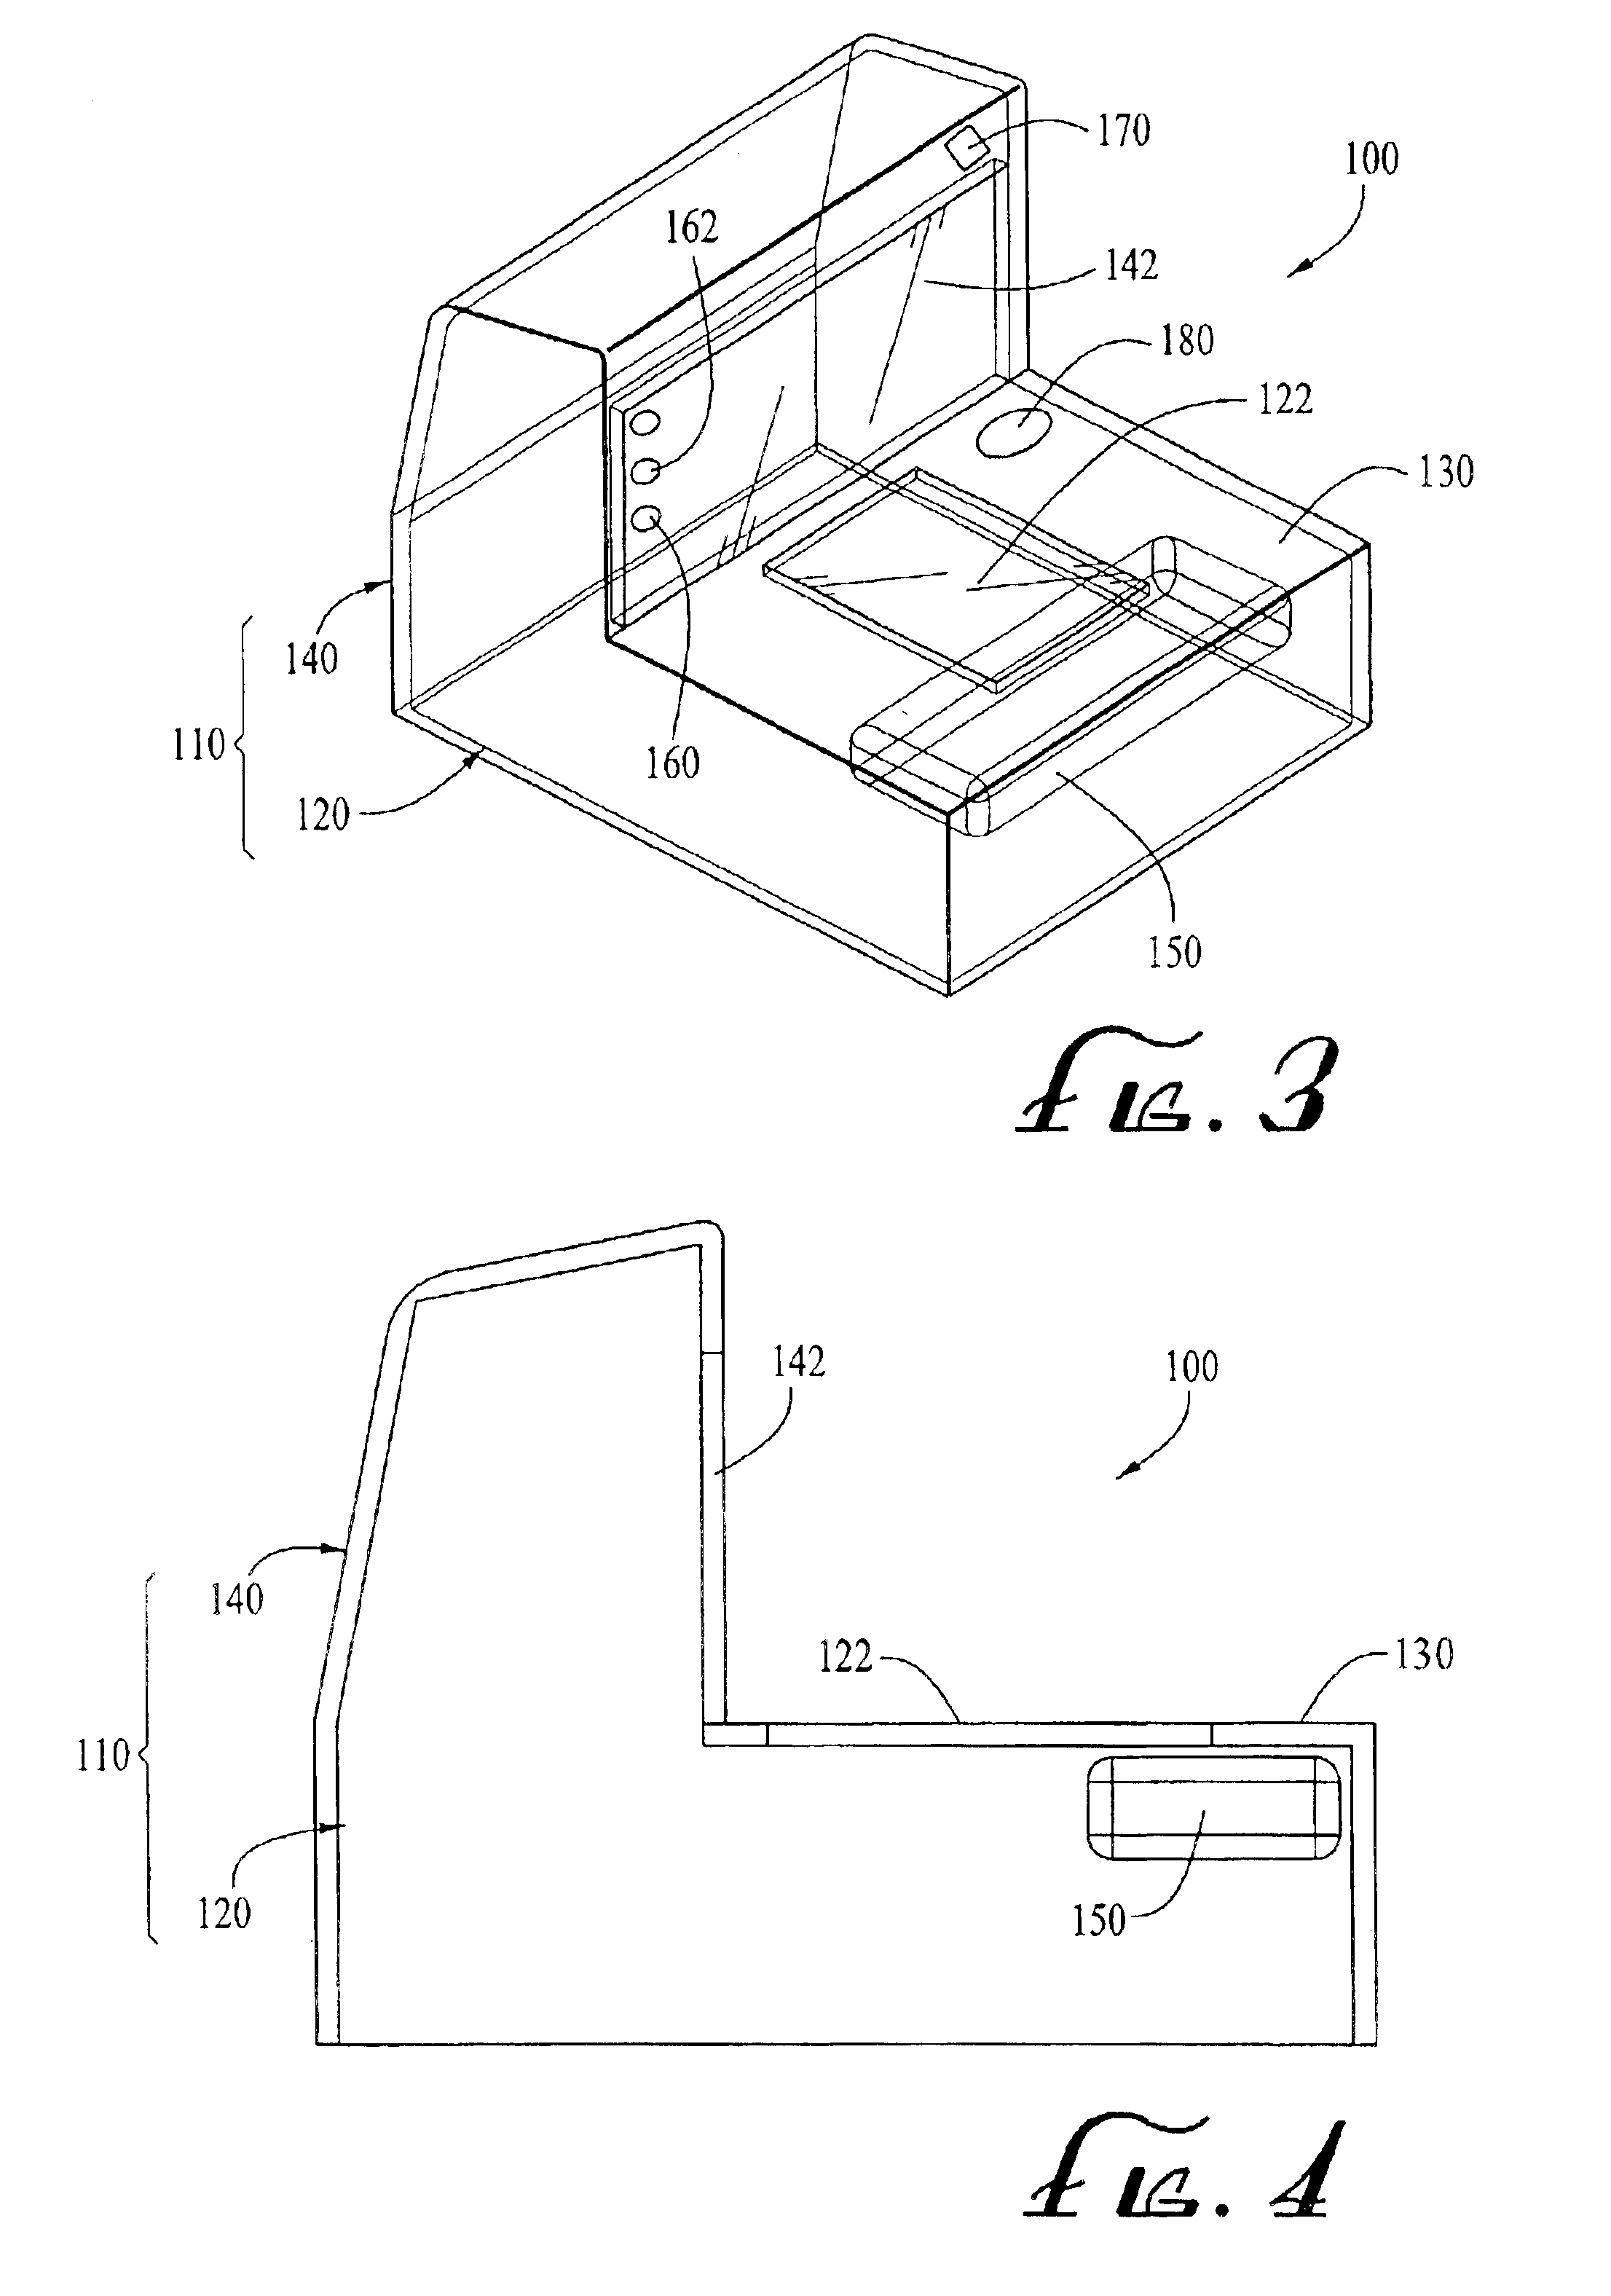 Systems and methods for data reading and EAS tag sensing and deactivating at retail checkout